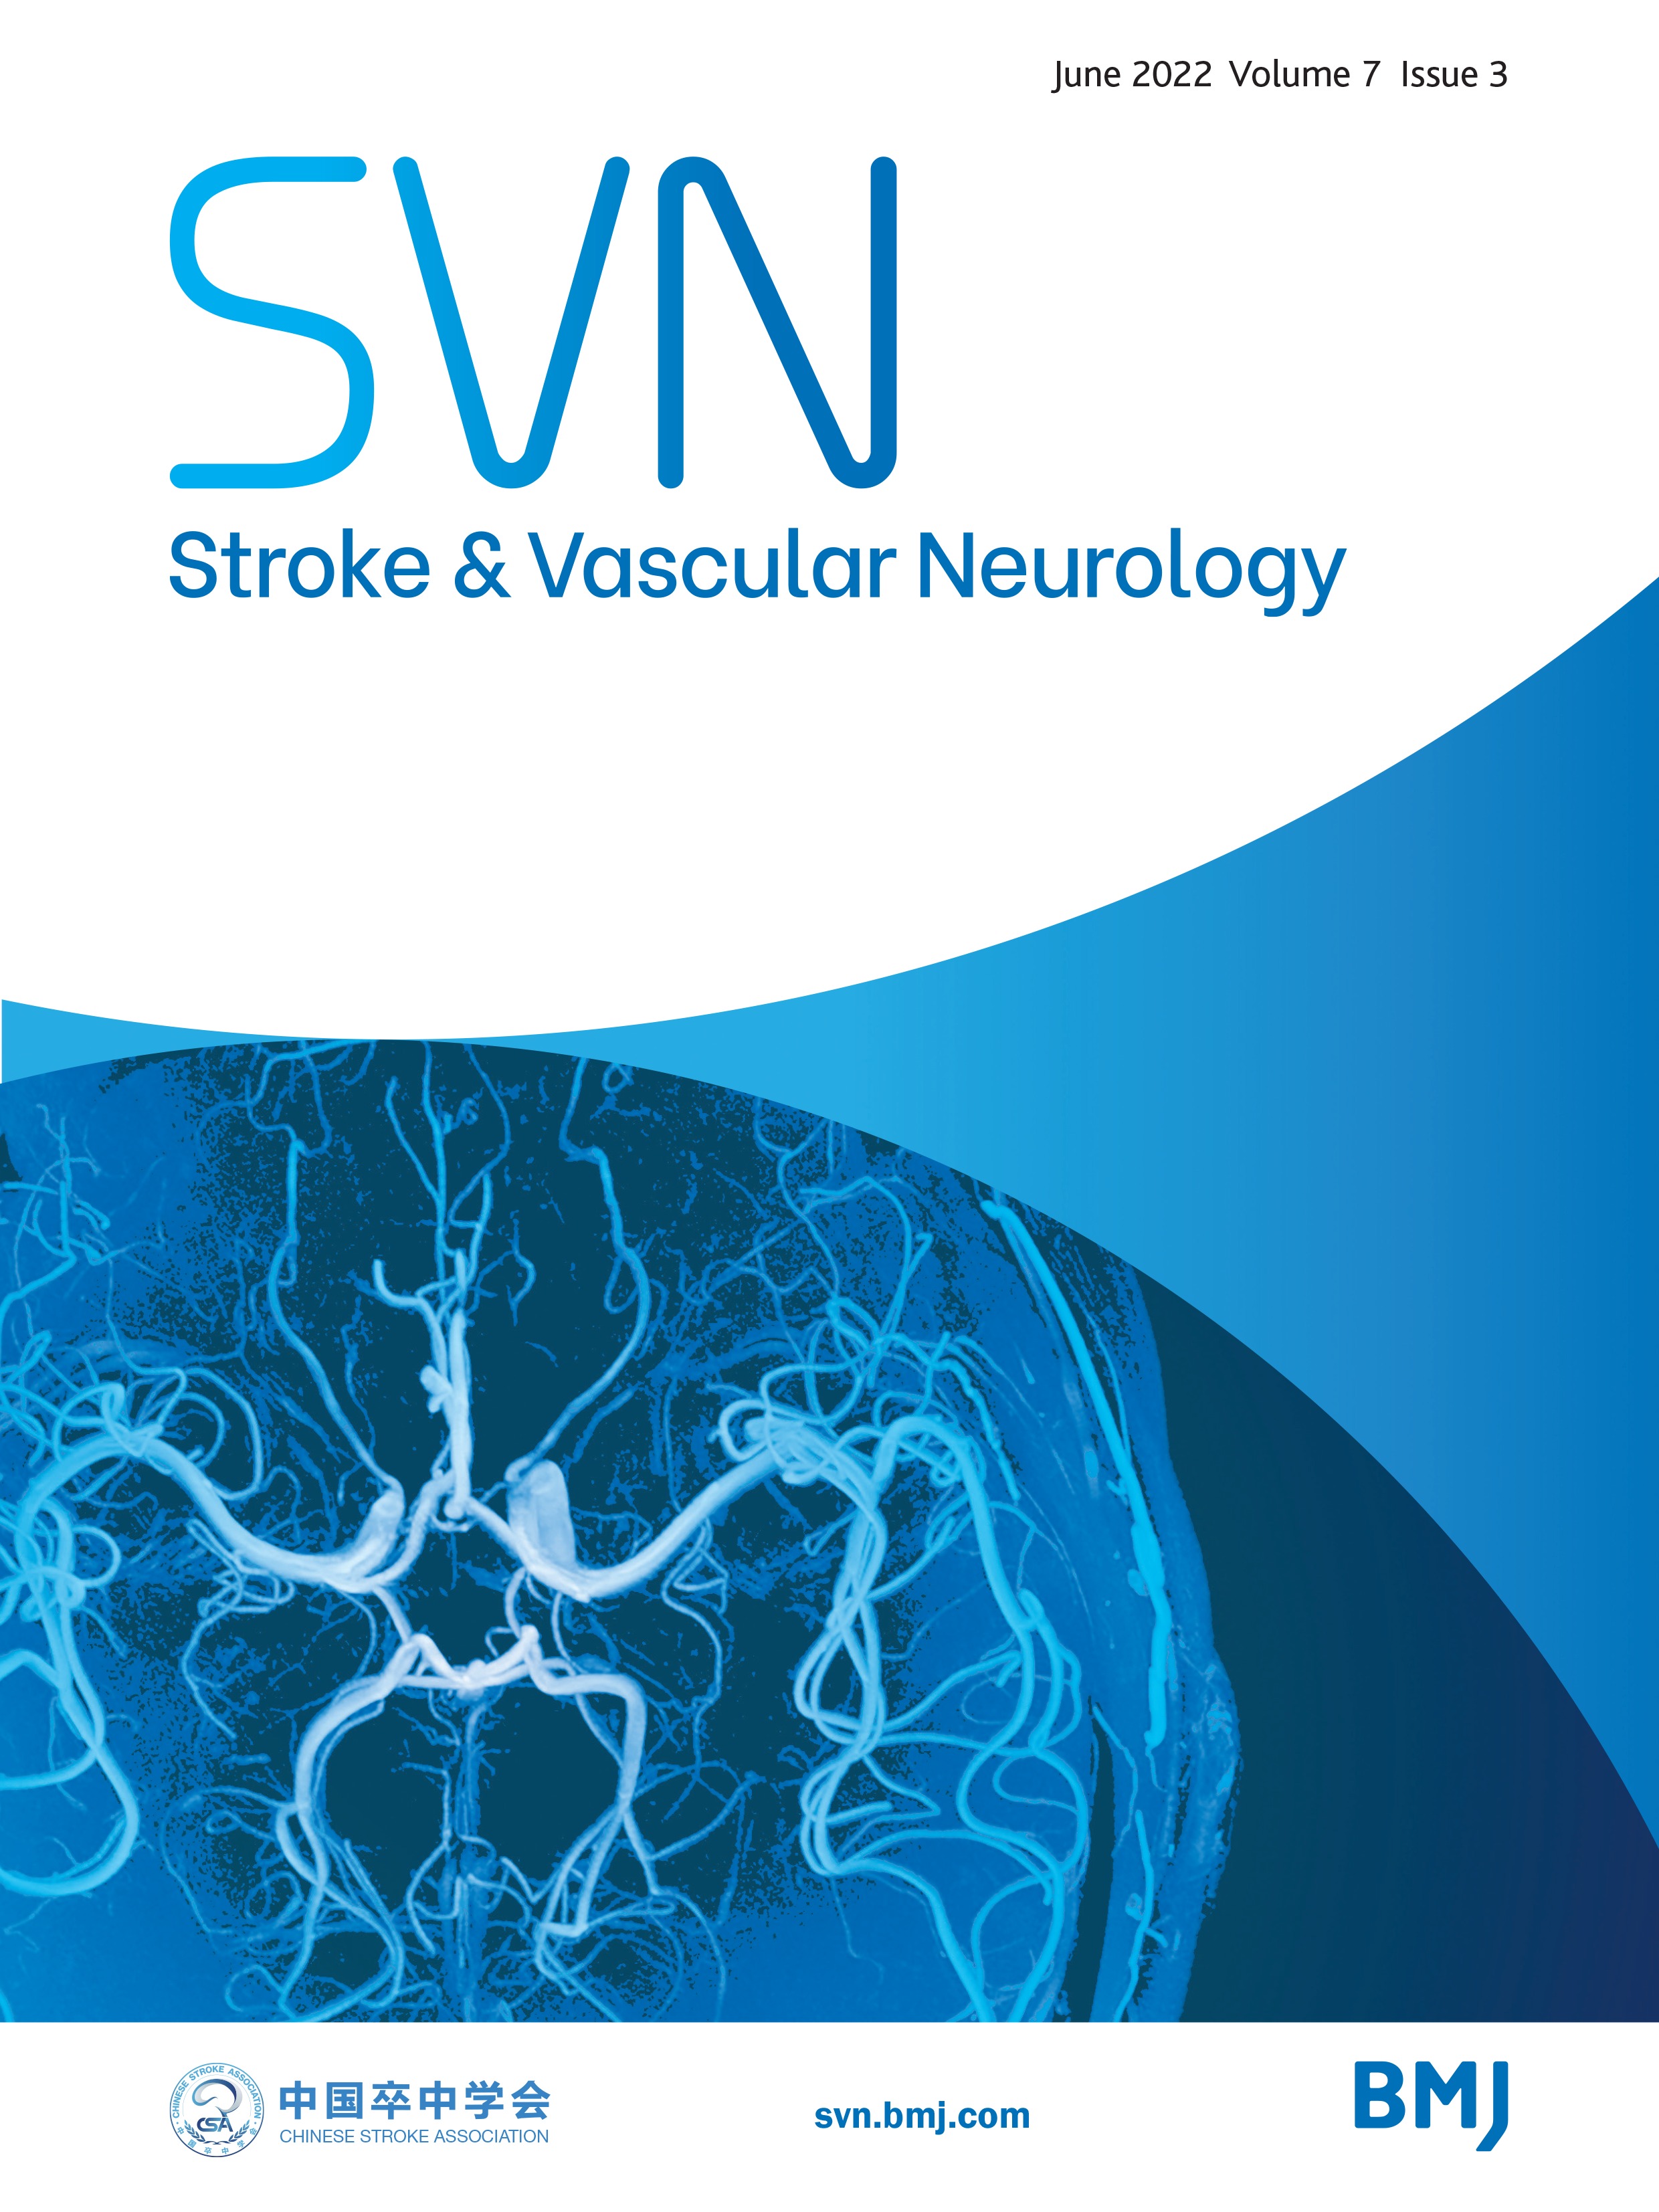 Discrepancies between clinical and autopsy findings in patients who had an acute stroke